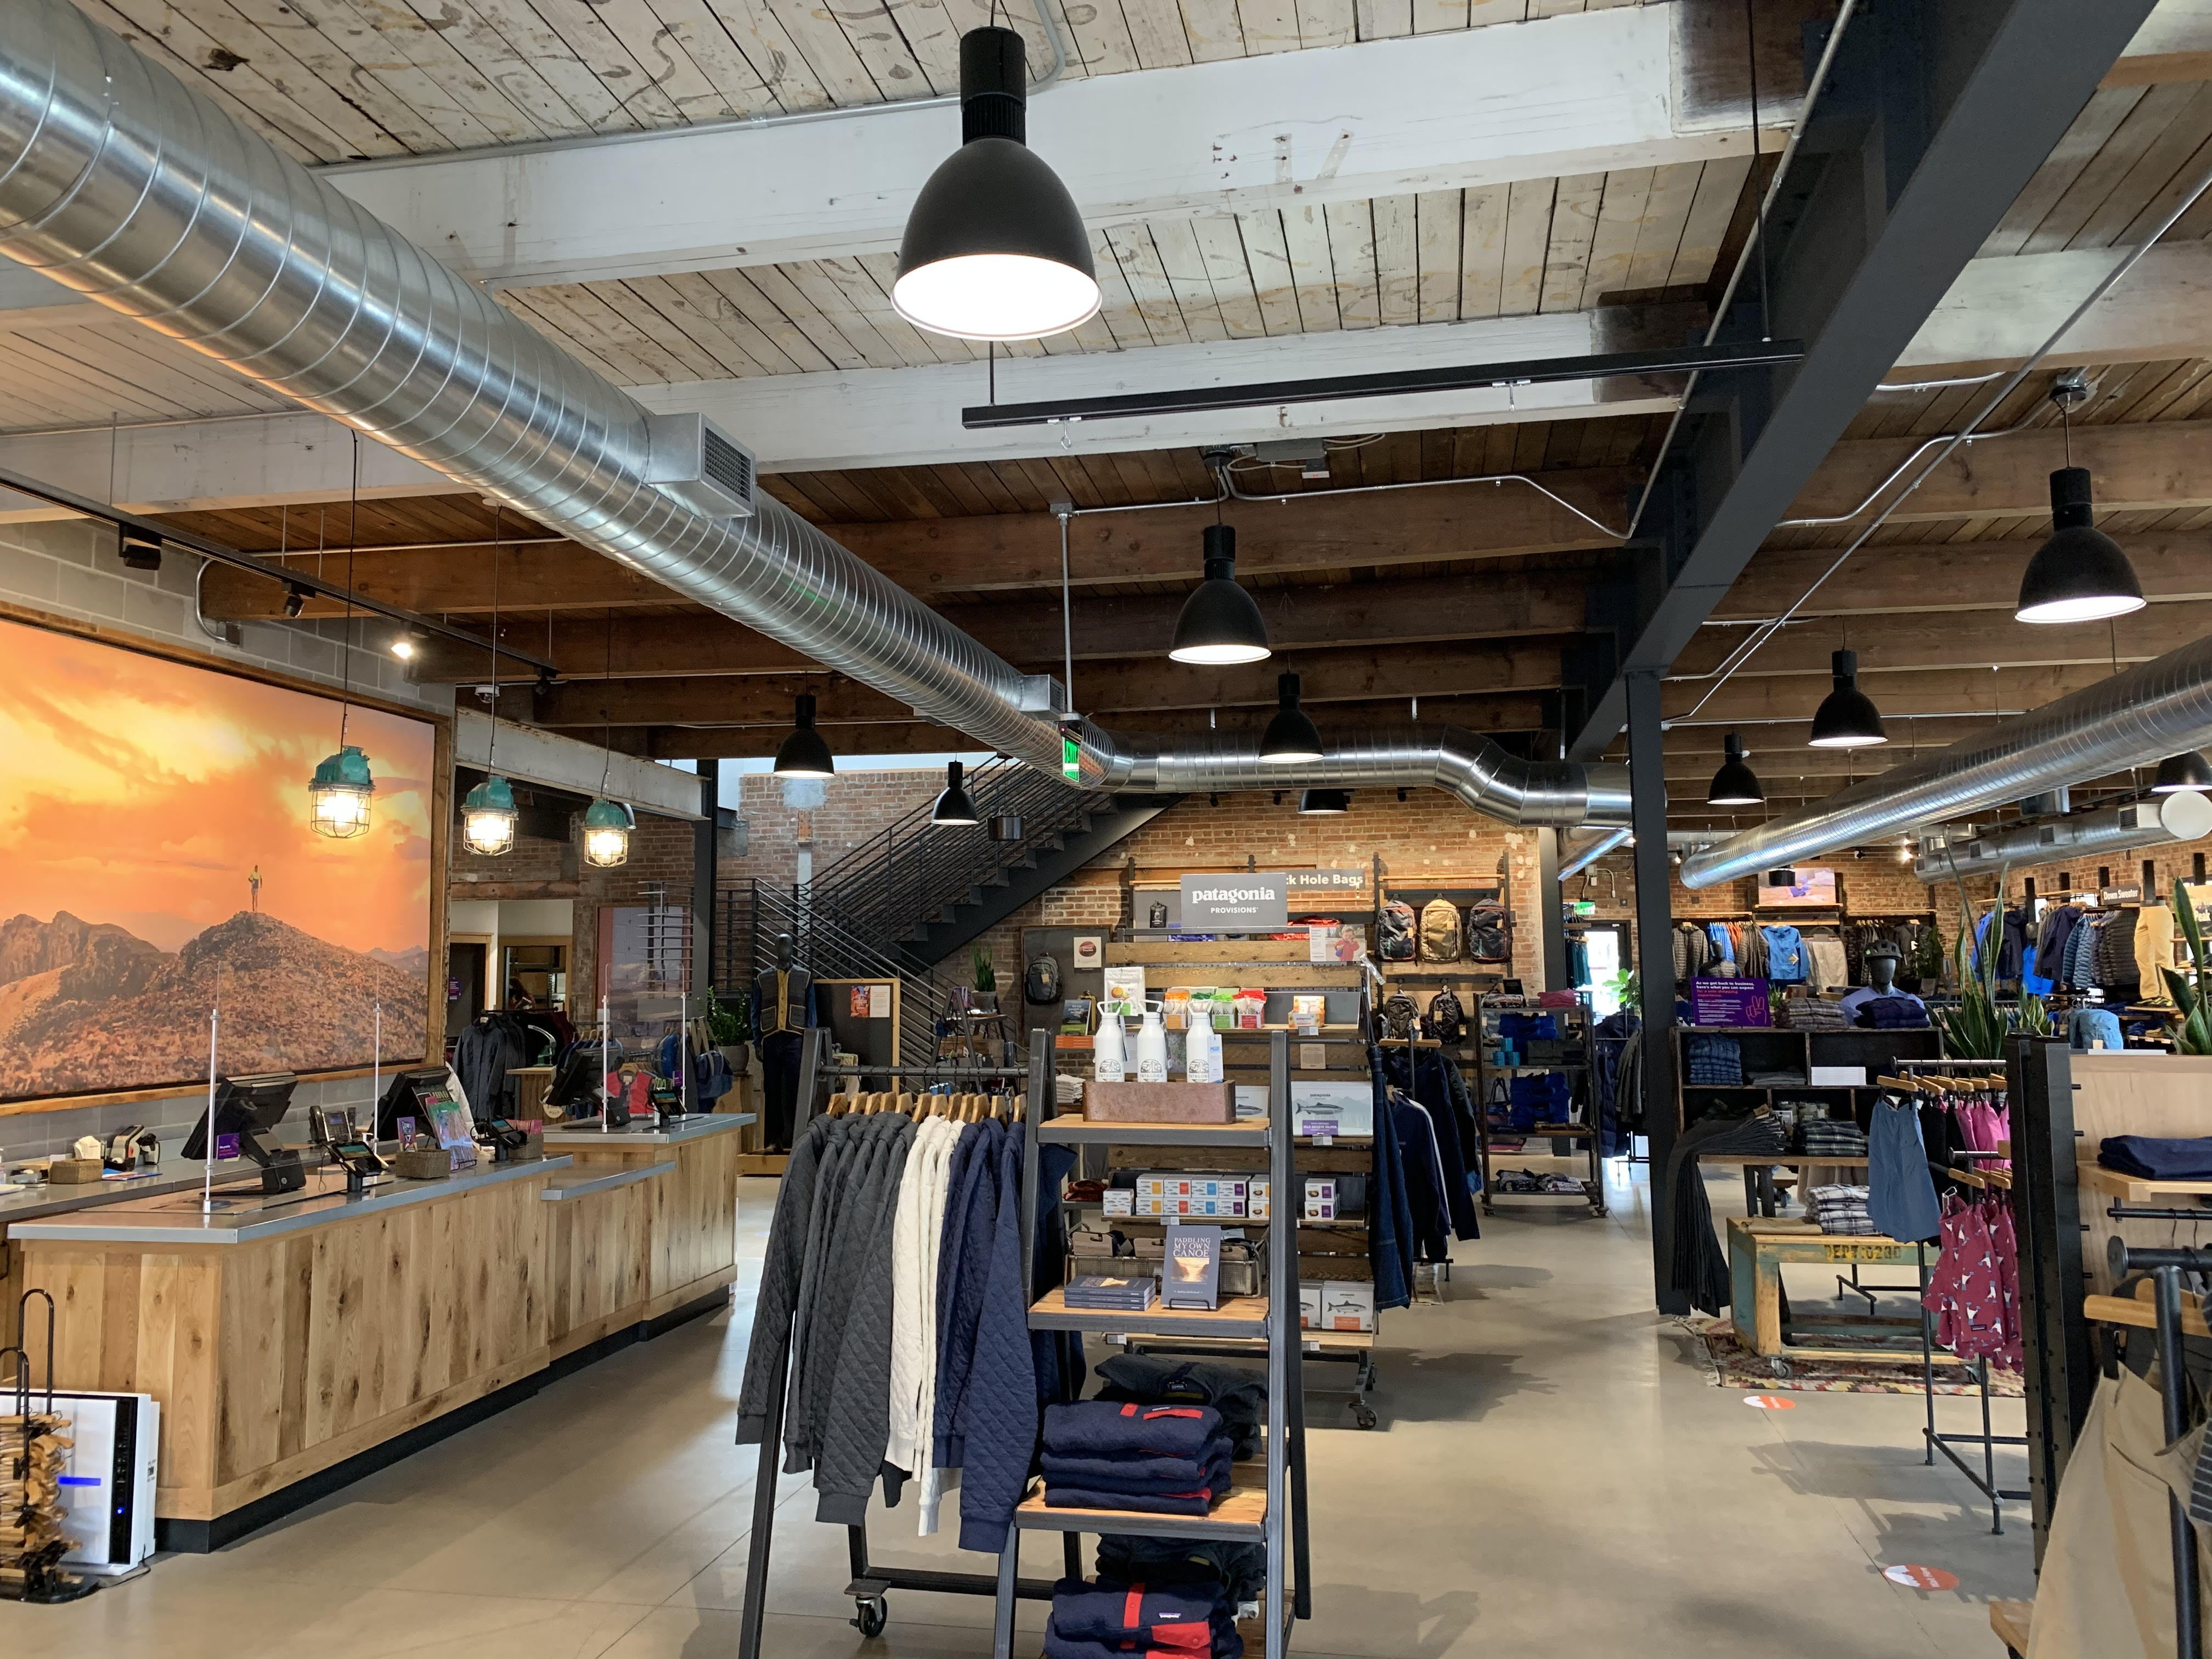 Photo of the interior of the Patagonia store in Denver.